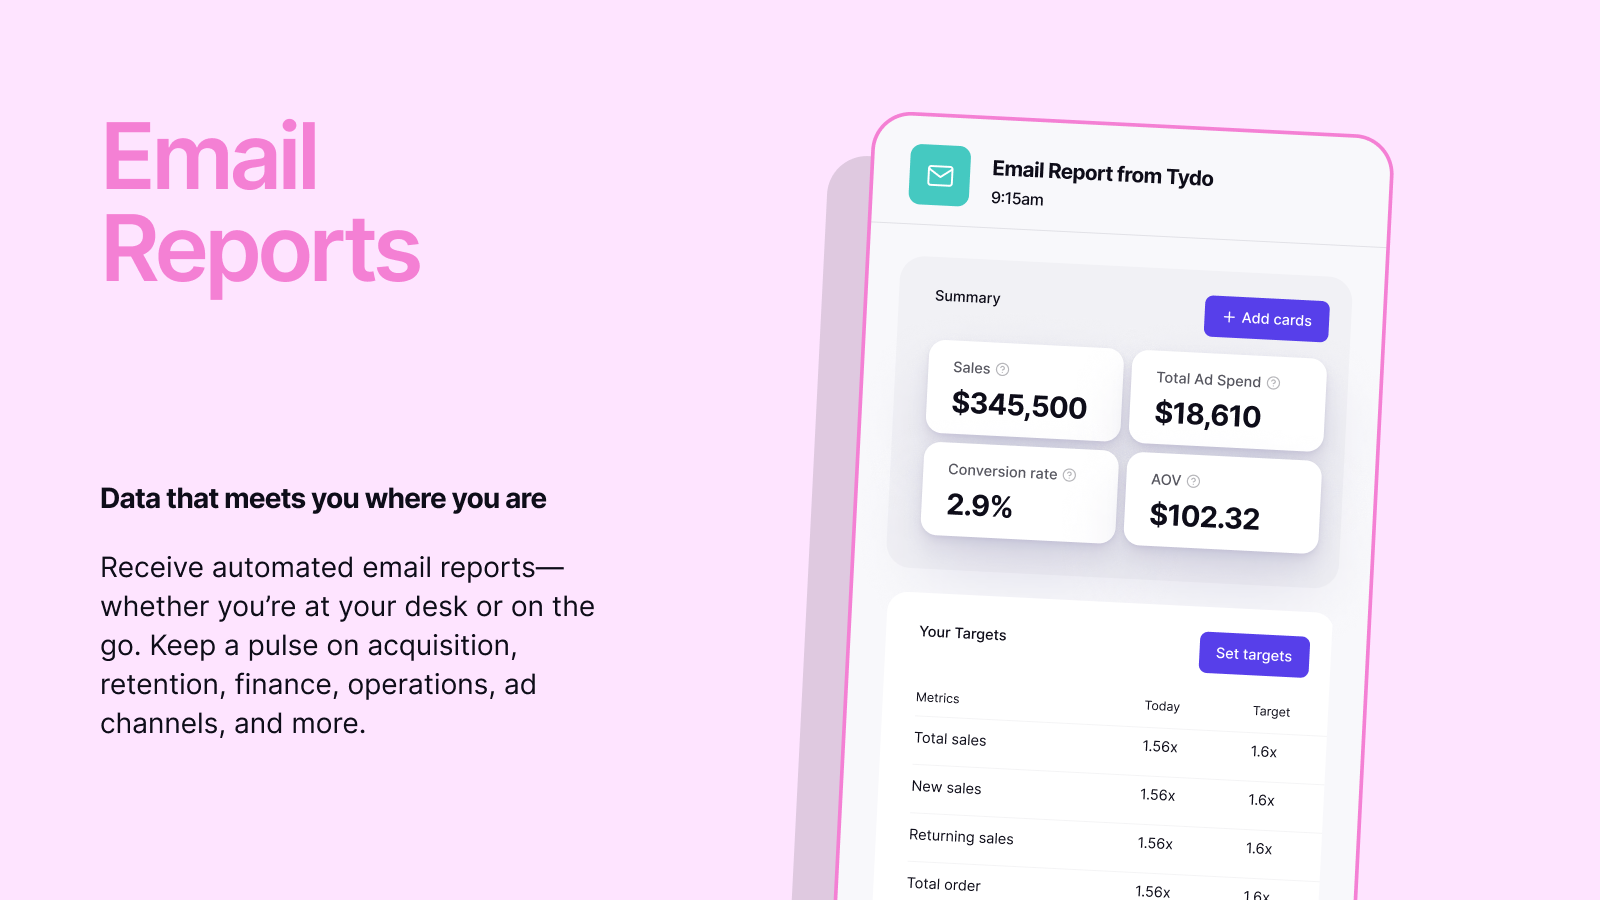 Email Reports: Performance reports sent directly to your inbox.